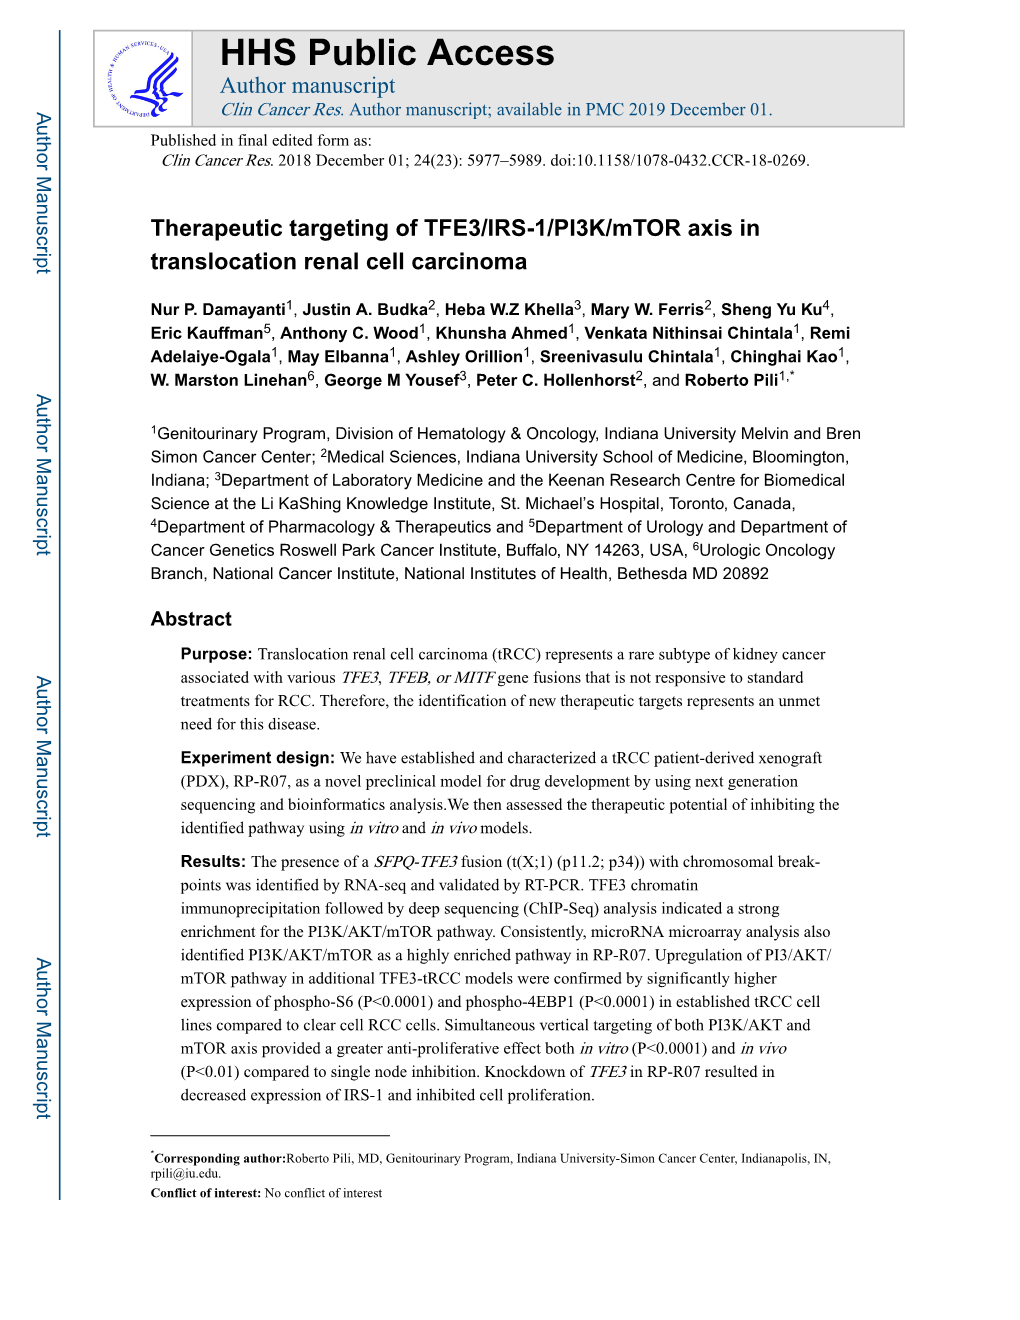 Therapeutic Targeting of TFE3/IRS-1/PI3K/Mtor Axis in Translocation Renal Cell Carcinoma